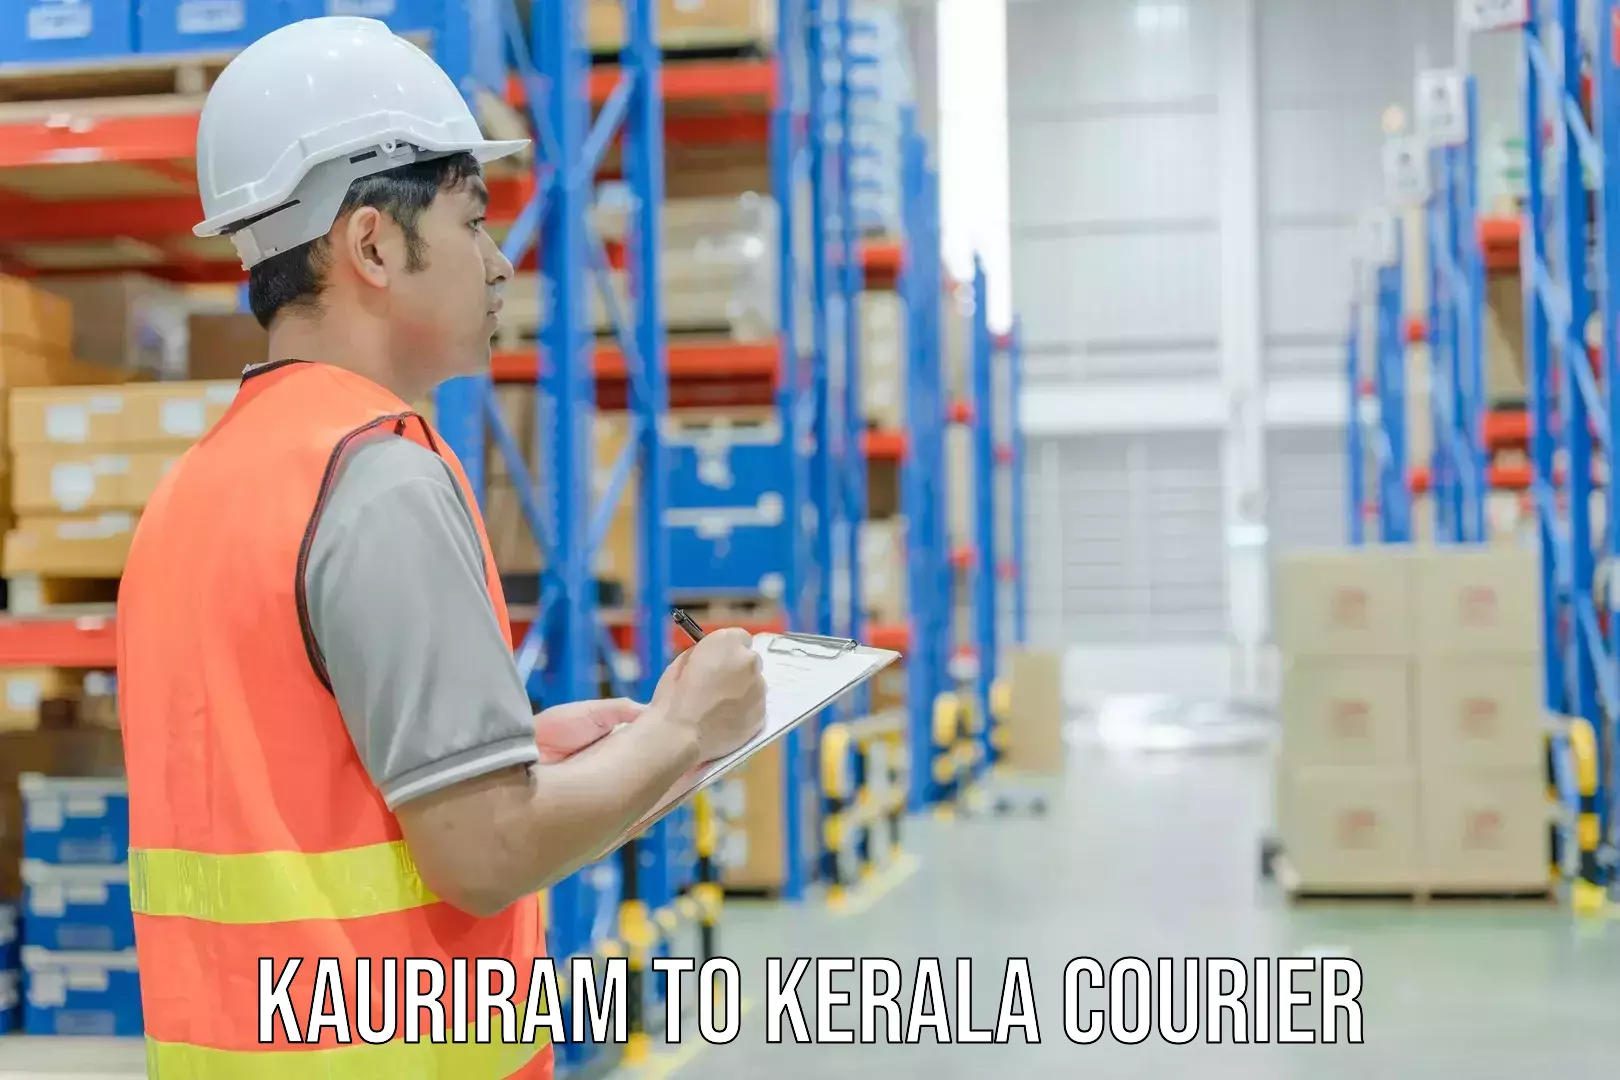 State-of-the-art courier technology Kauriram to Panthalam